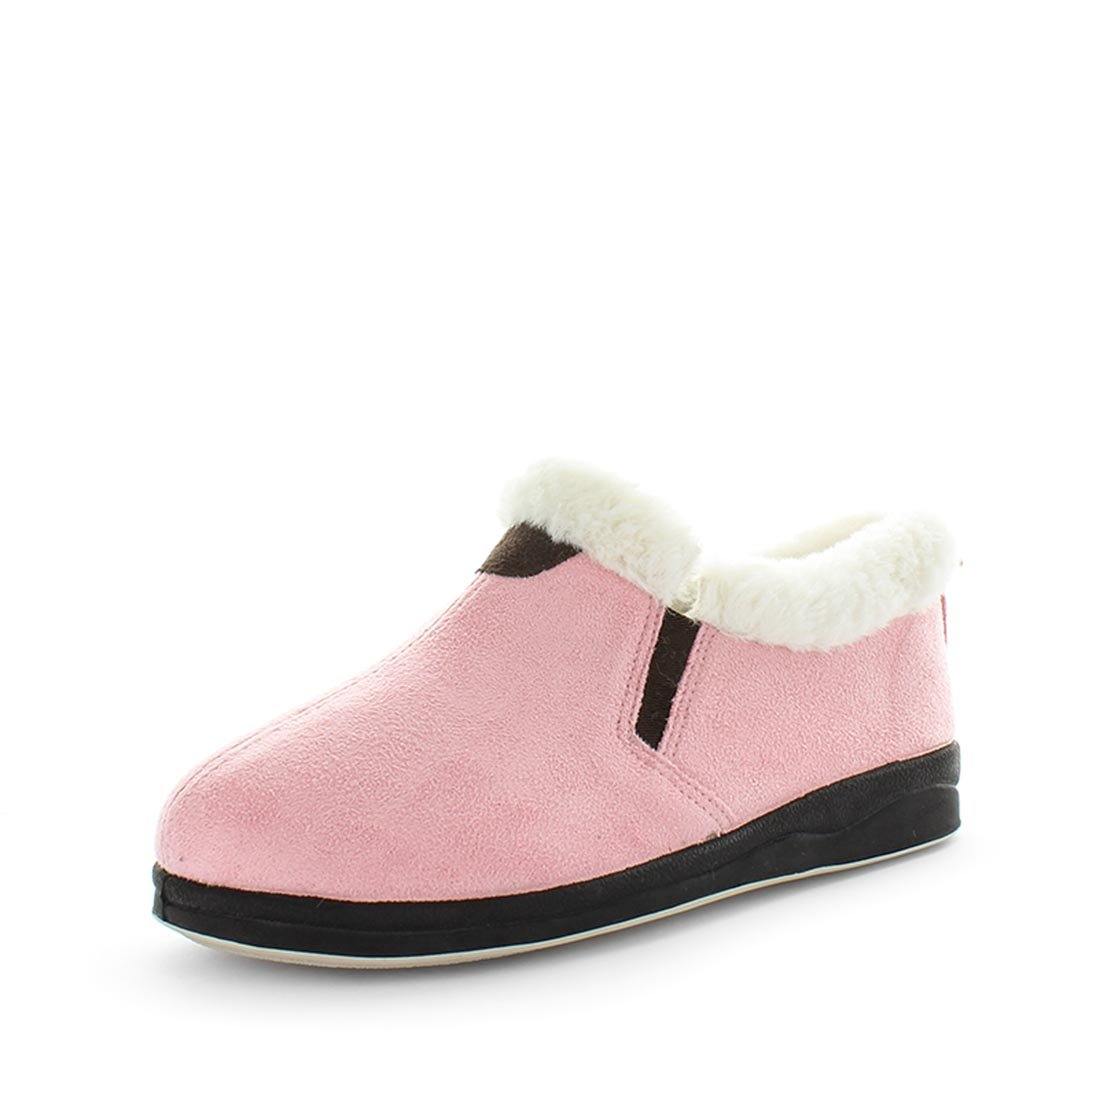 Elivia by panda slippers  - comfort slippers - women's slippers - boot style slippers - slipper boots - fur collar and fur lining slipper with warm and comfy fit and twin gussets for easy slip on and off